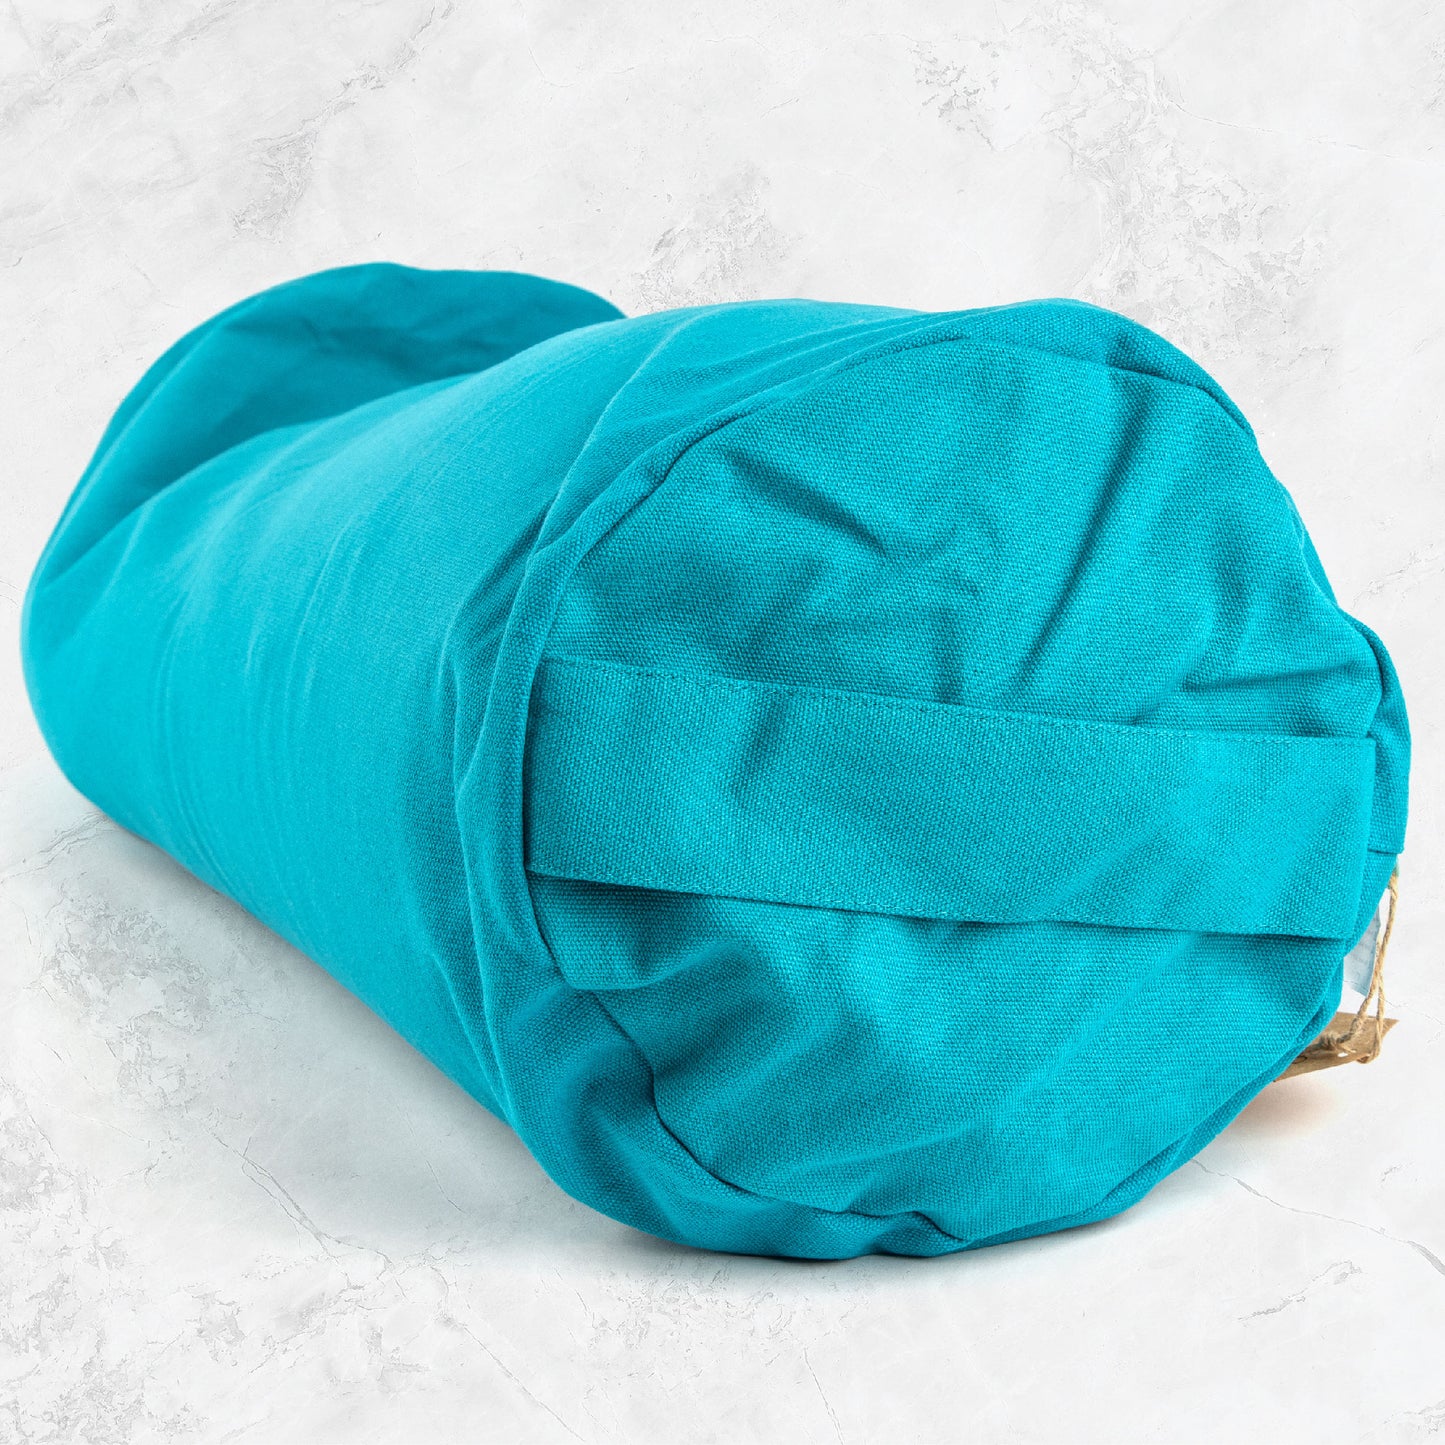 Buckwheat Support Bolster Pillow - Turquoise